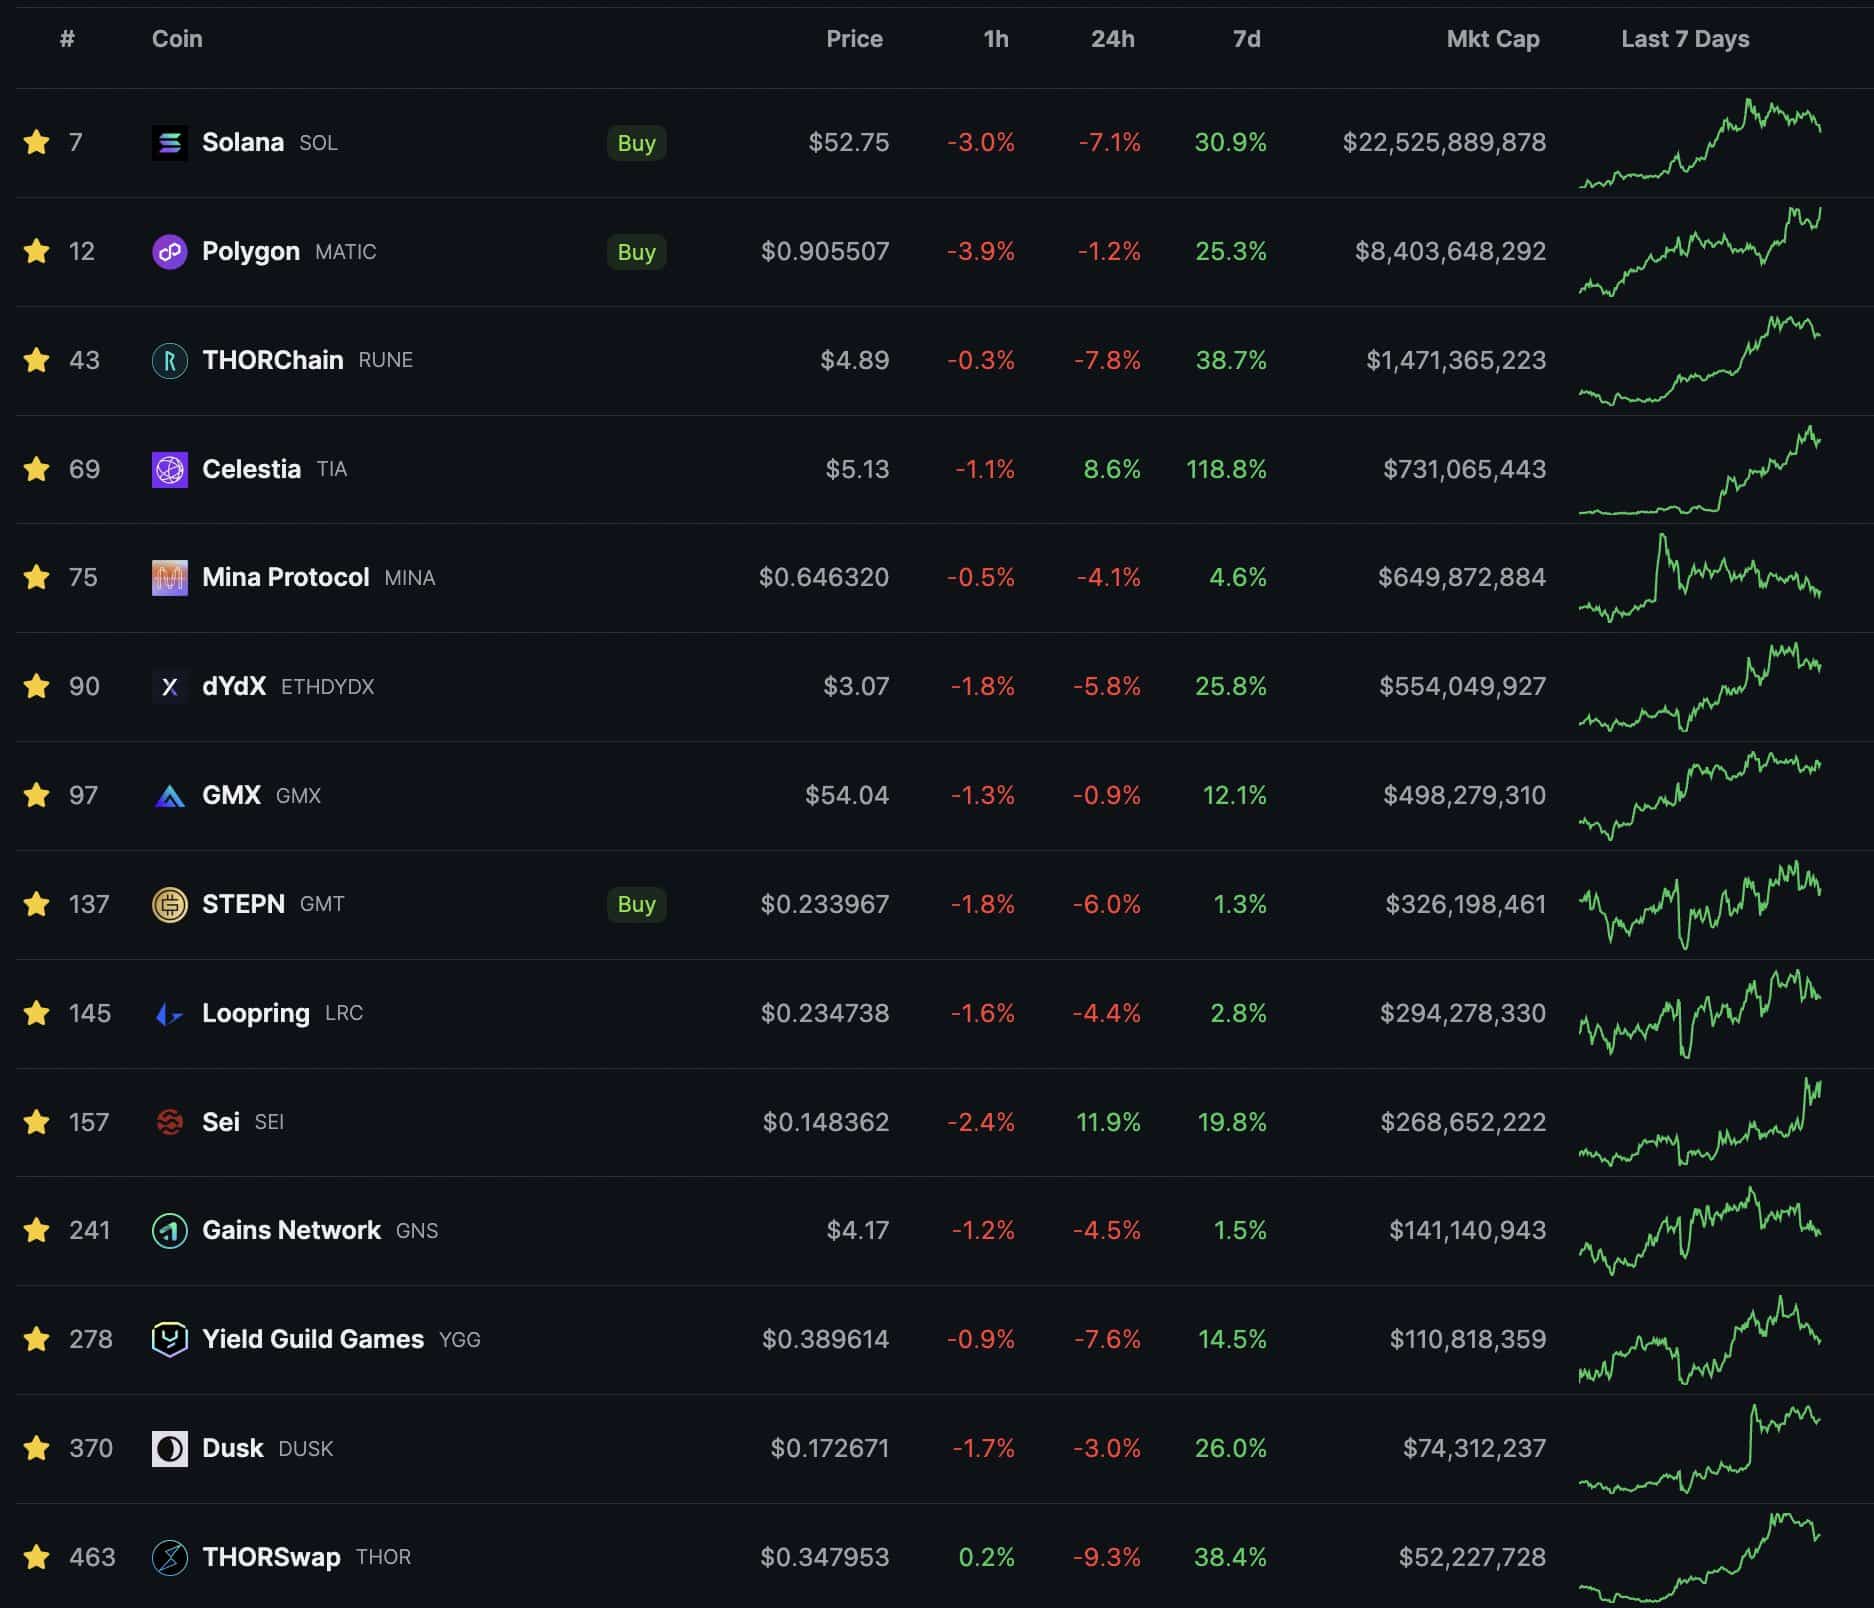 Best performing altcoins